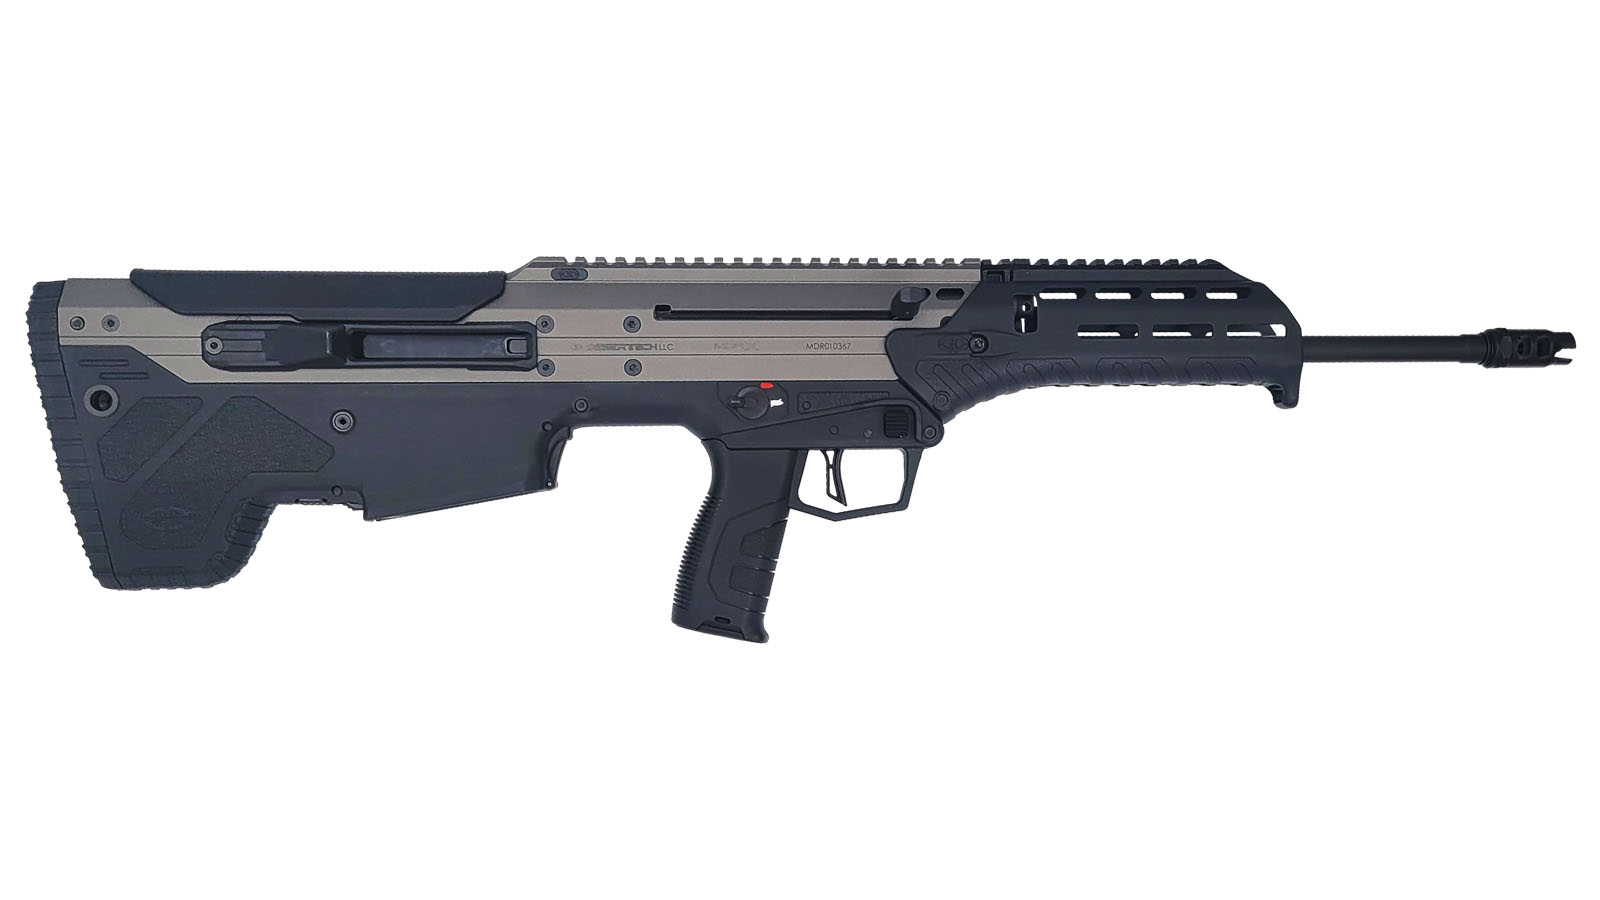 MDRx Rifle, 556NATO 223Rem 20" 30rd Side-Ejection Tungsten